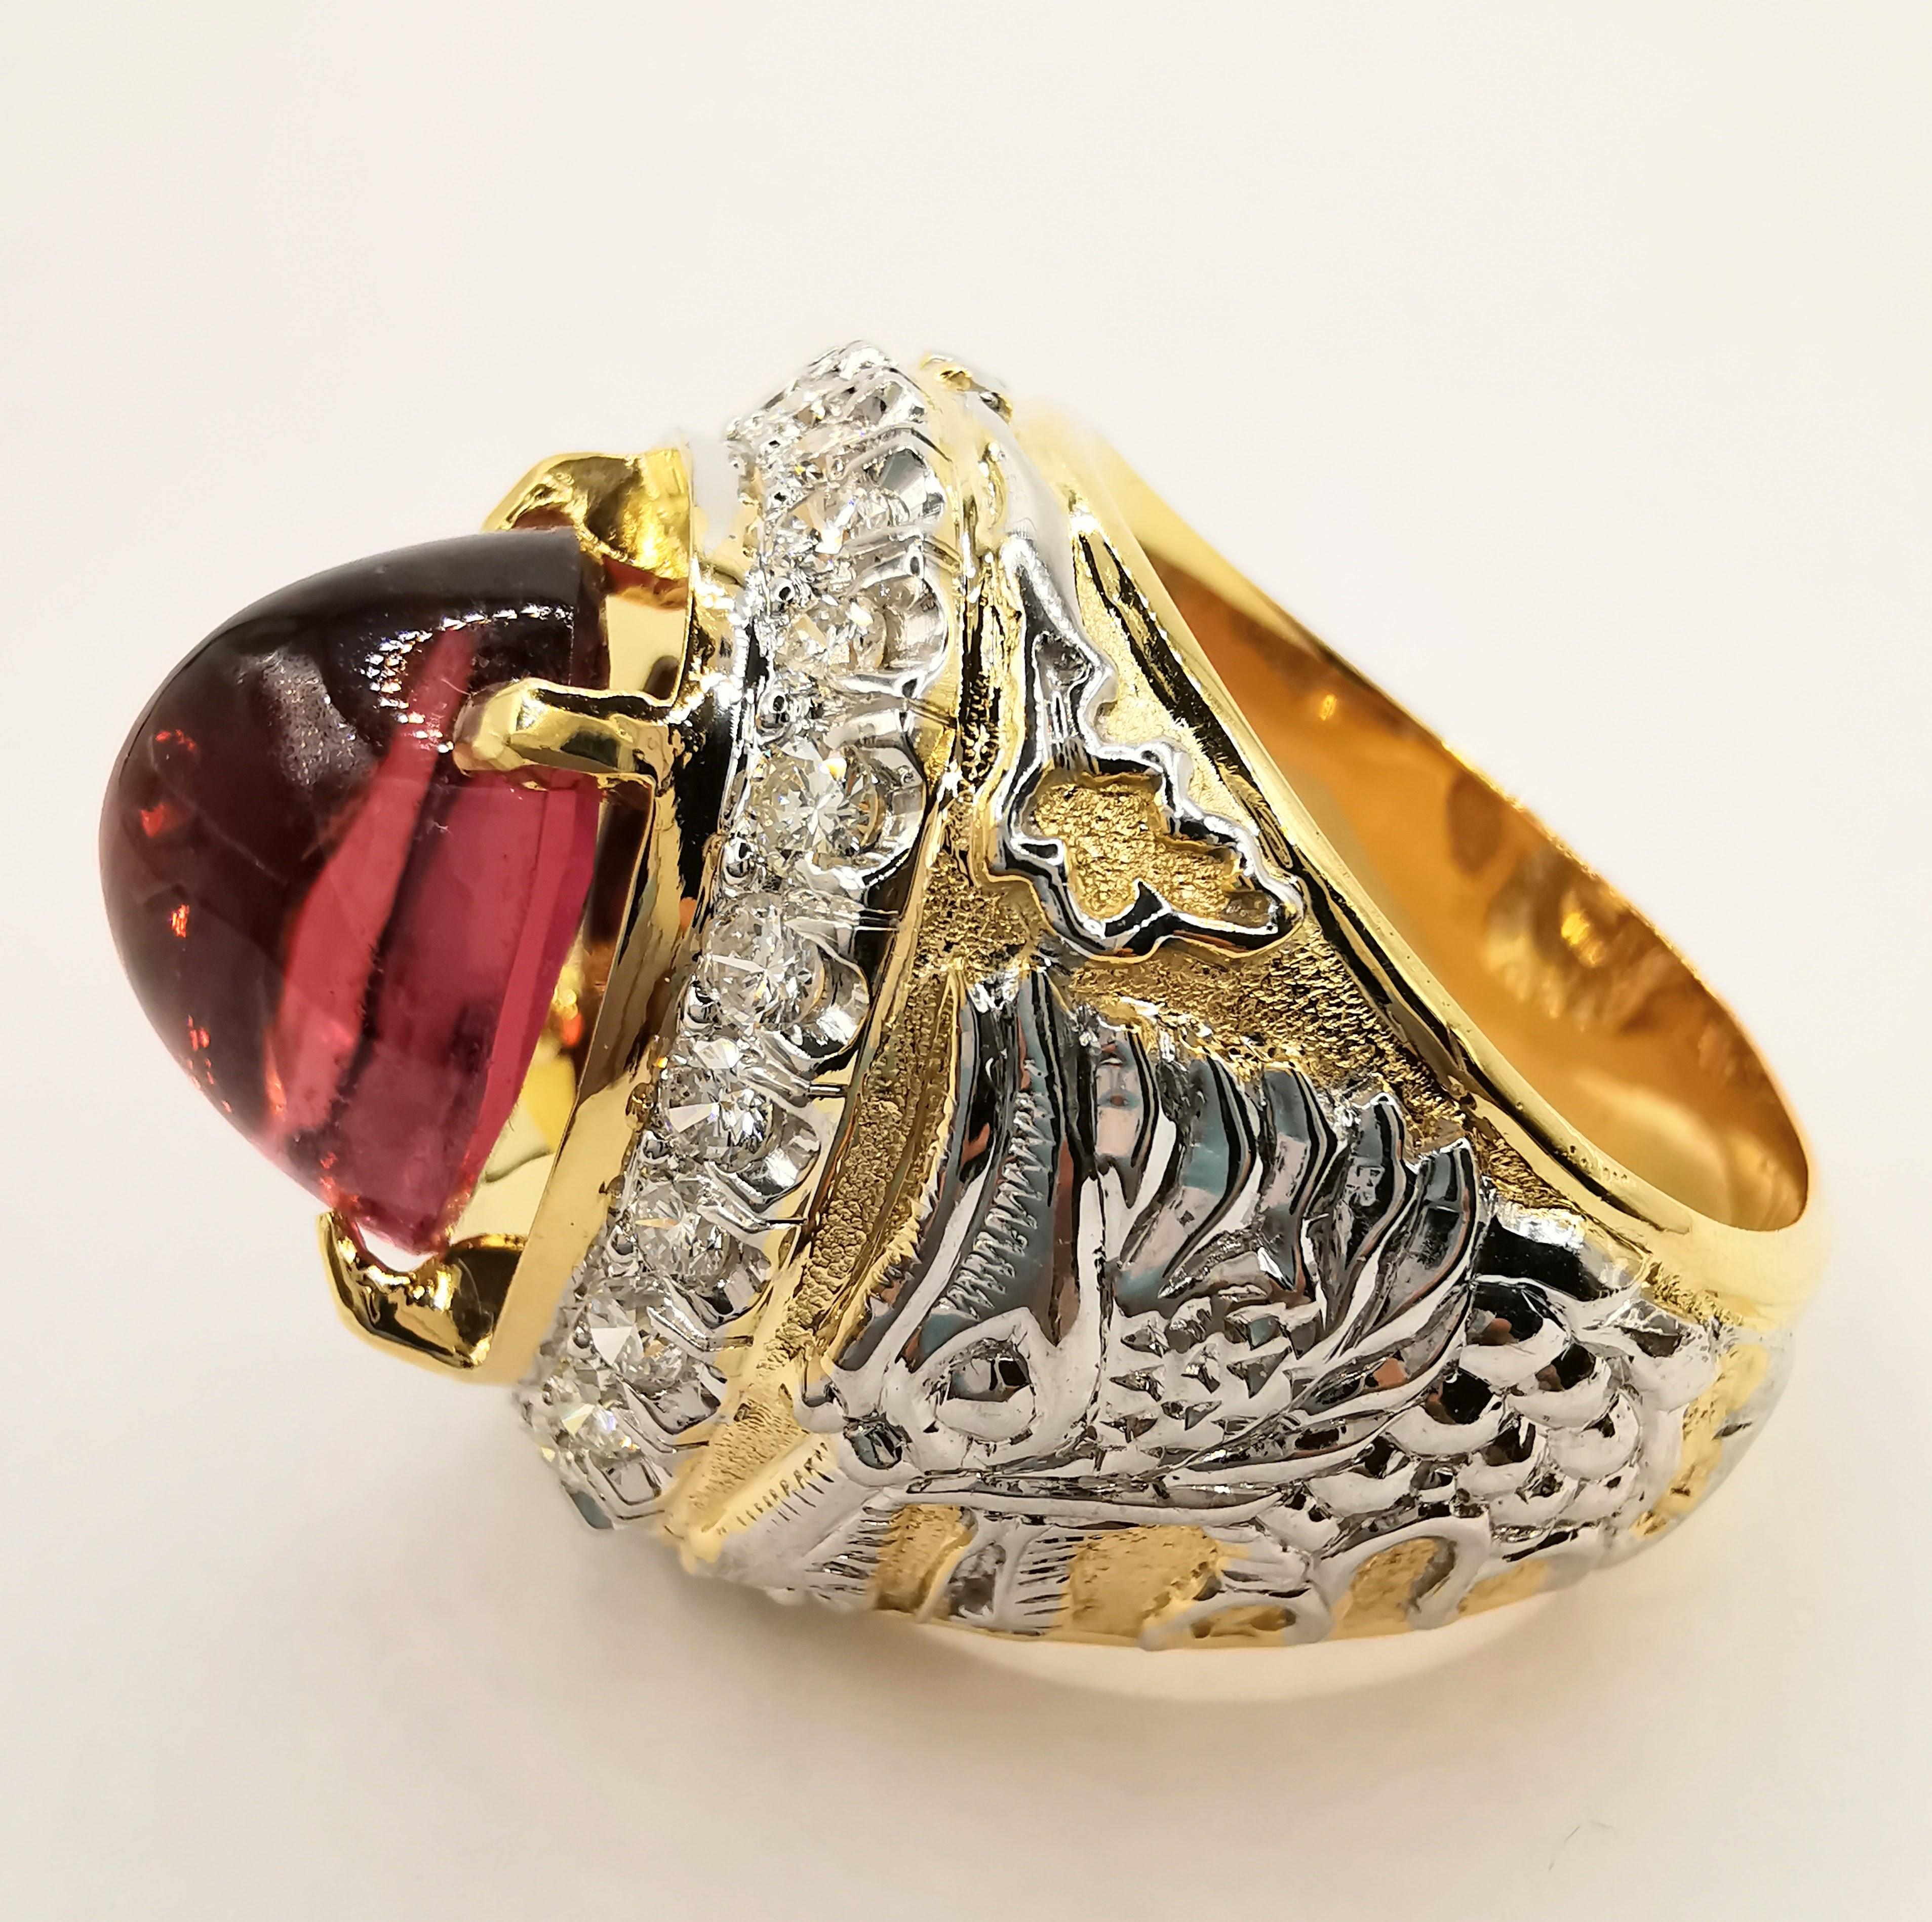 Medieval Vintage Dragon 10.2ct Cabochon Pink Tourmaline Diamond Men's Ring in 18K Gold For Sale